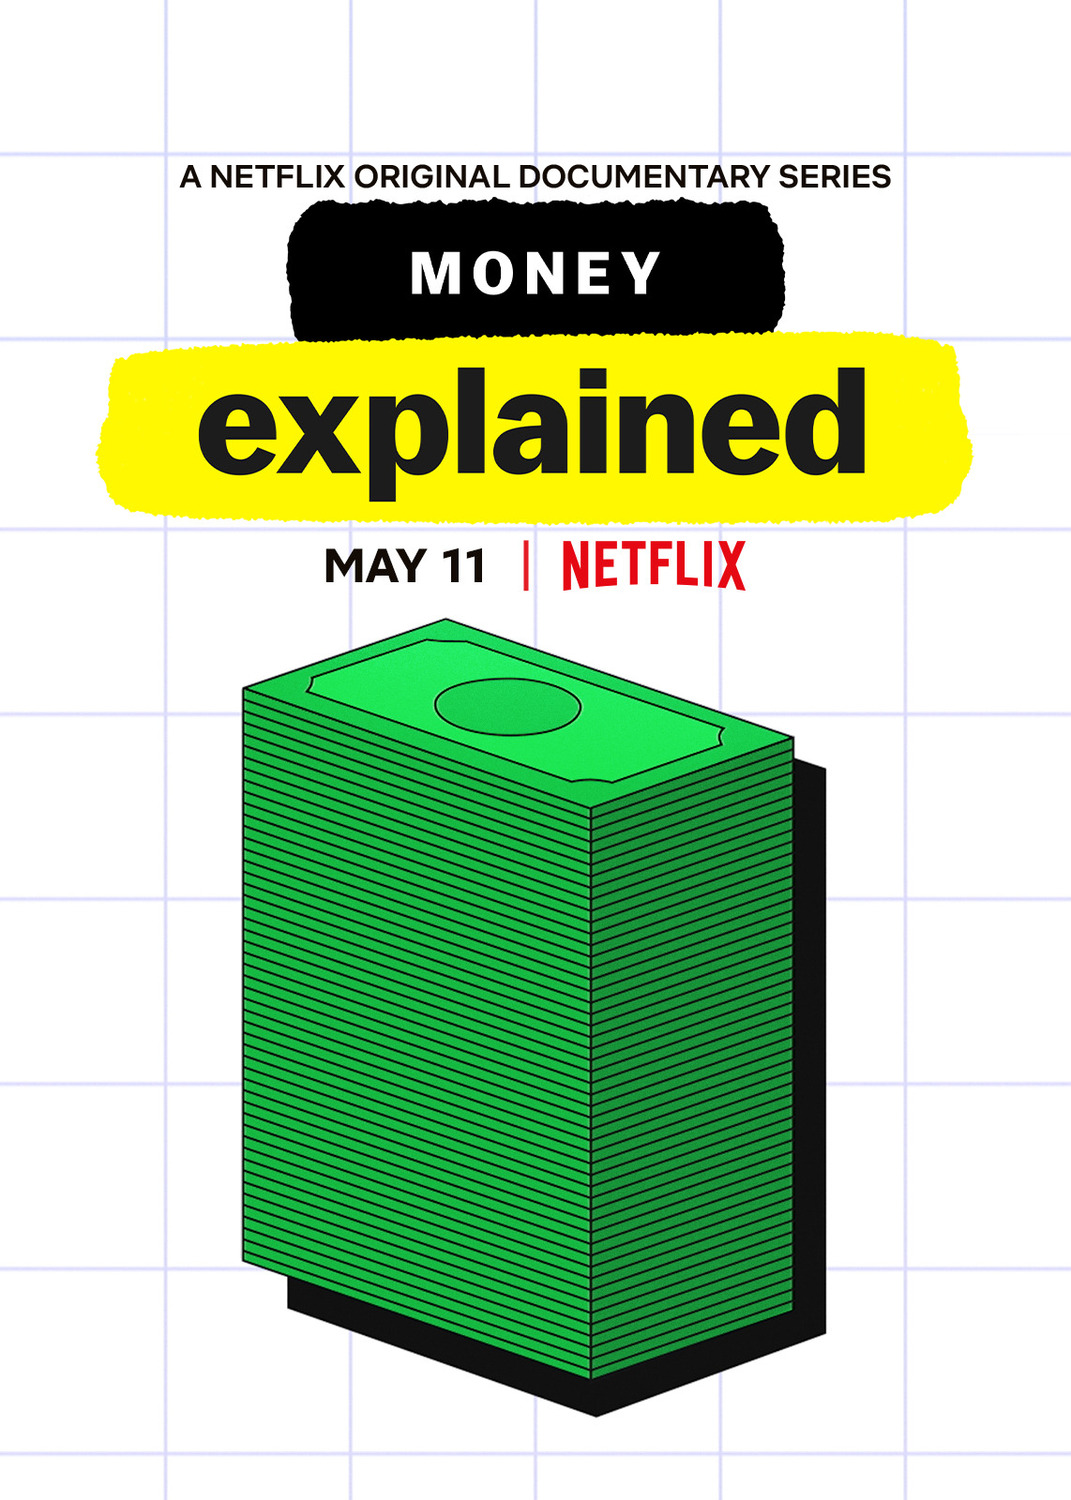 Extra Large TV Poster Image for Money, Explained 